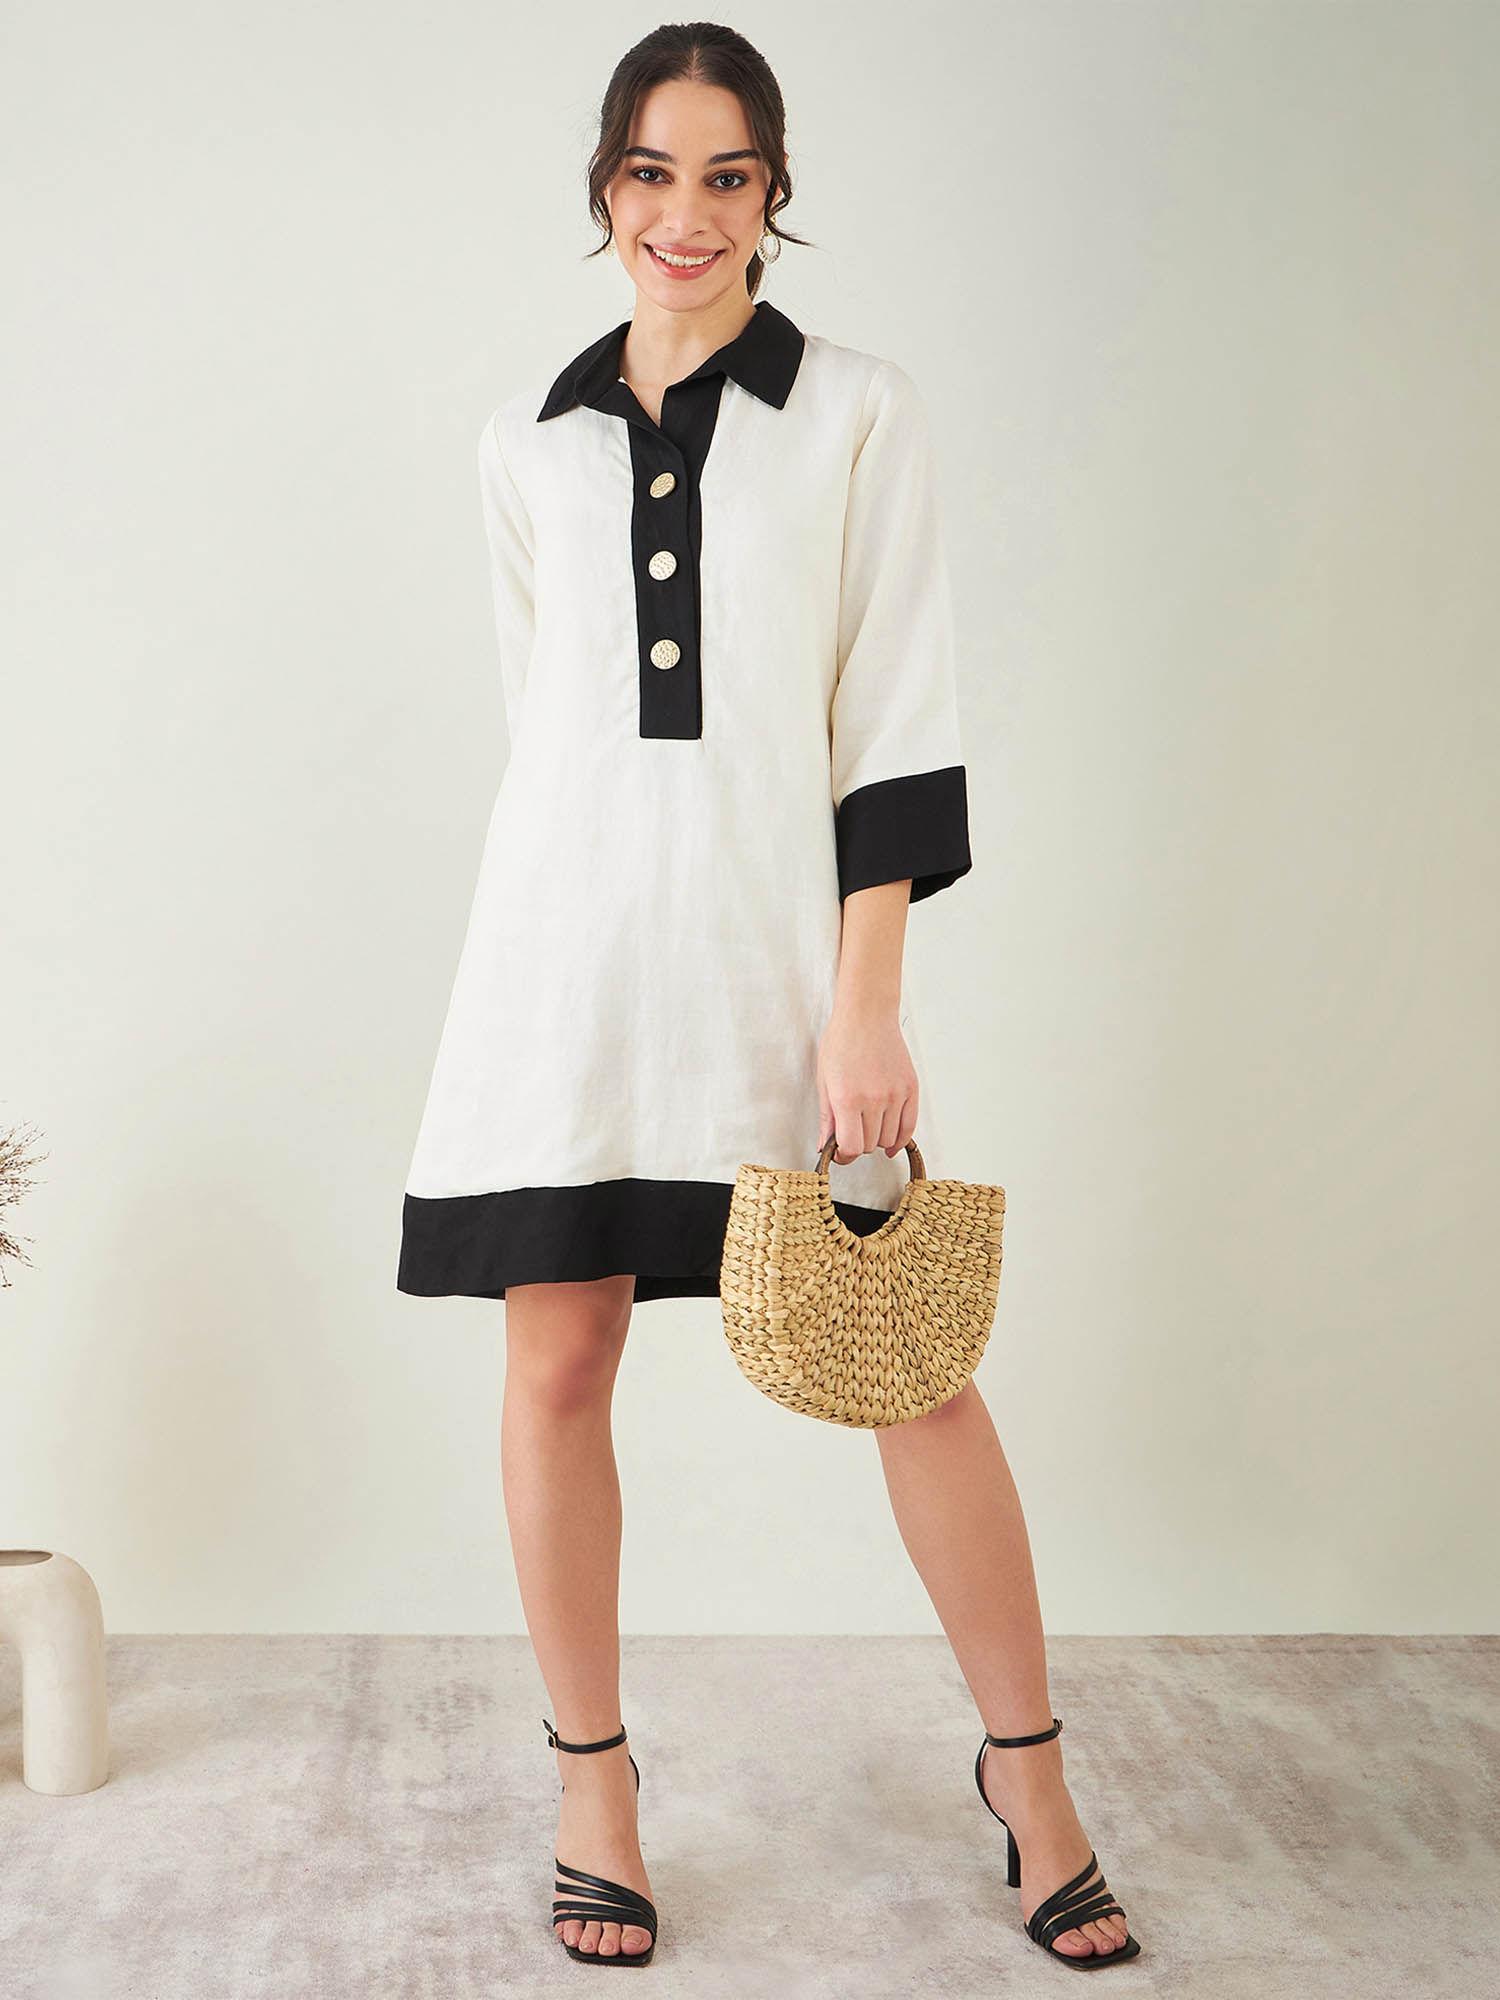 off-white and black linen dress